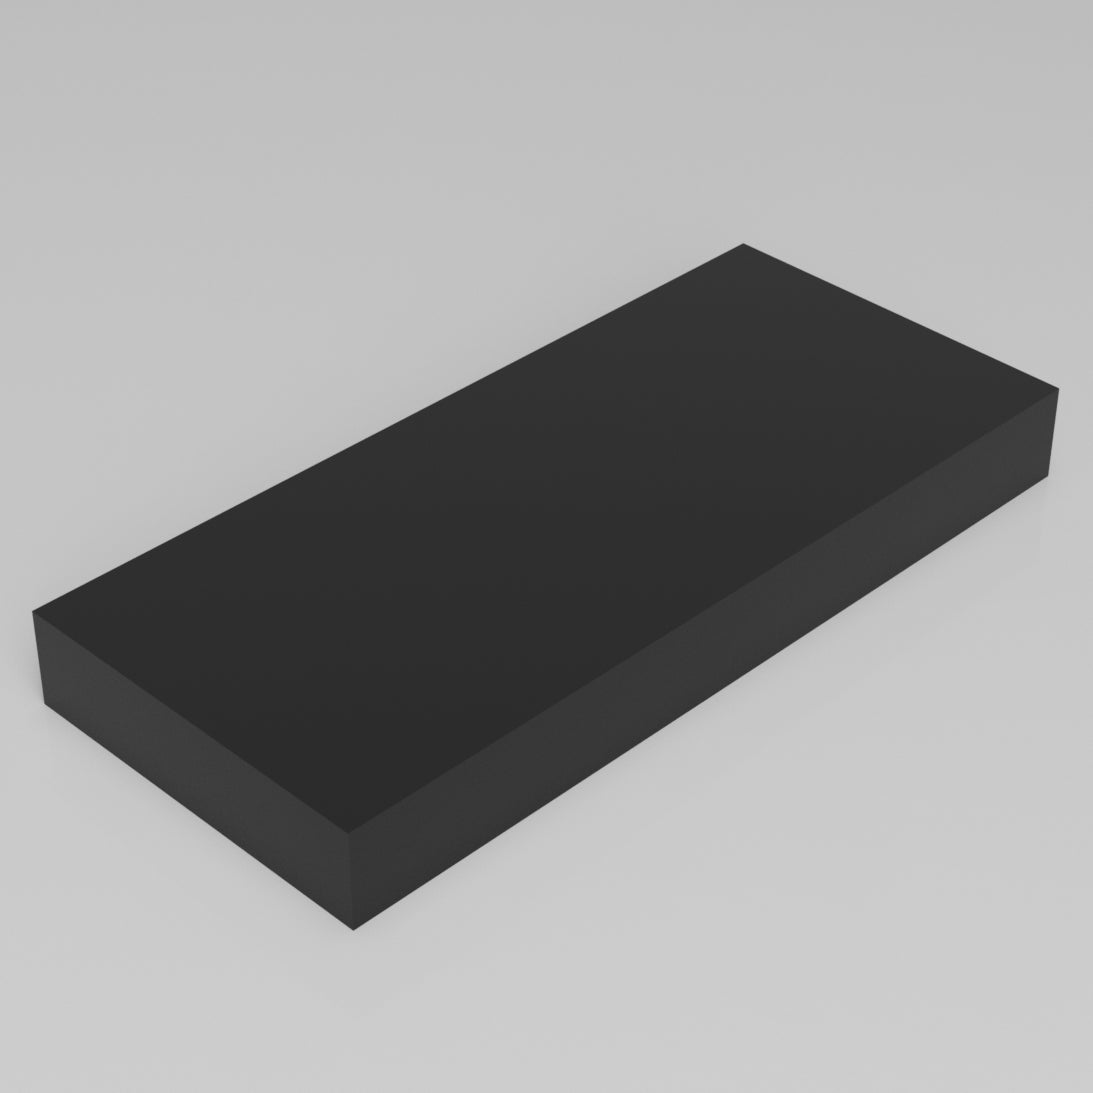 Machinable Wax Rectangular Block Front View 2 Inch by 8 Inch by 18 Inch